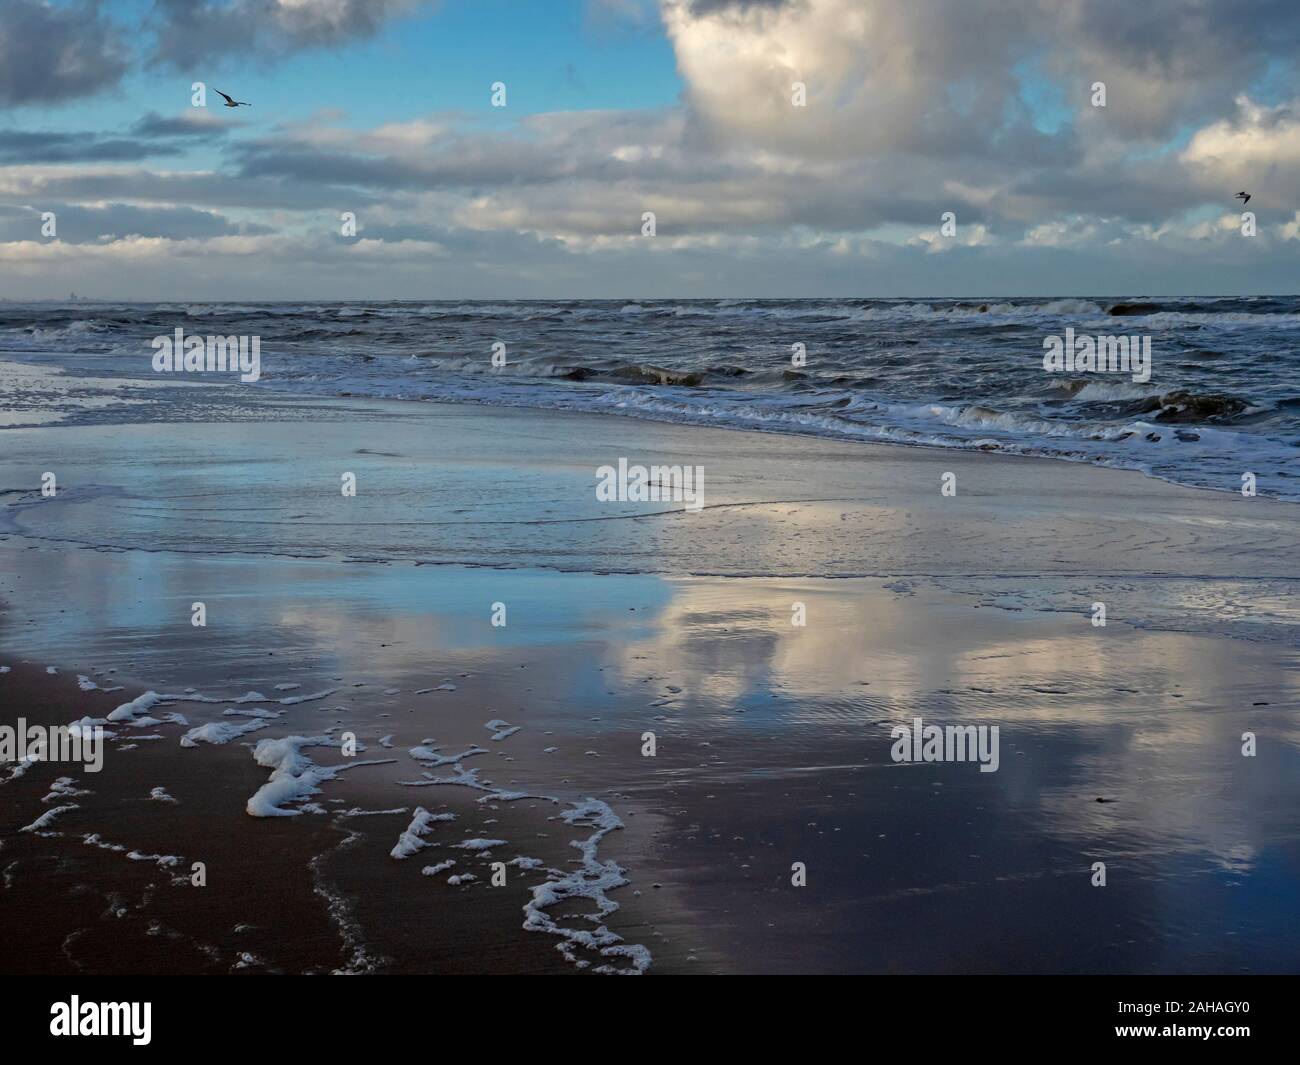 Dramatic blue sky with white clouds reflected on the wet beach at low tide at Noordwijk in The Netherlands Stock Photo